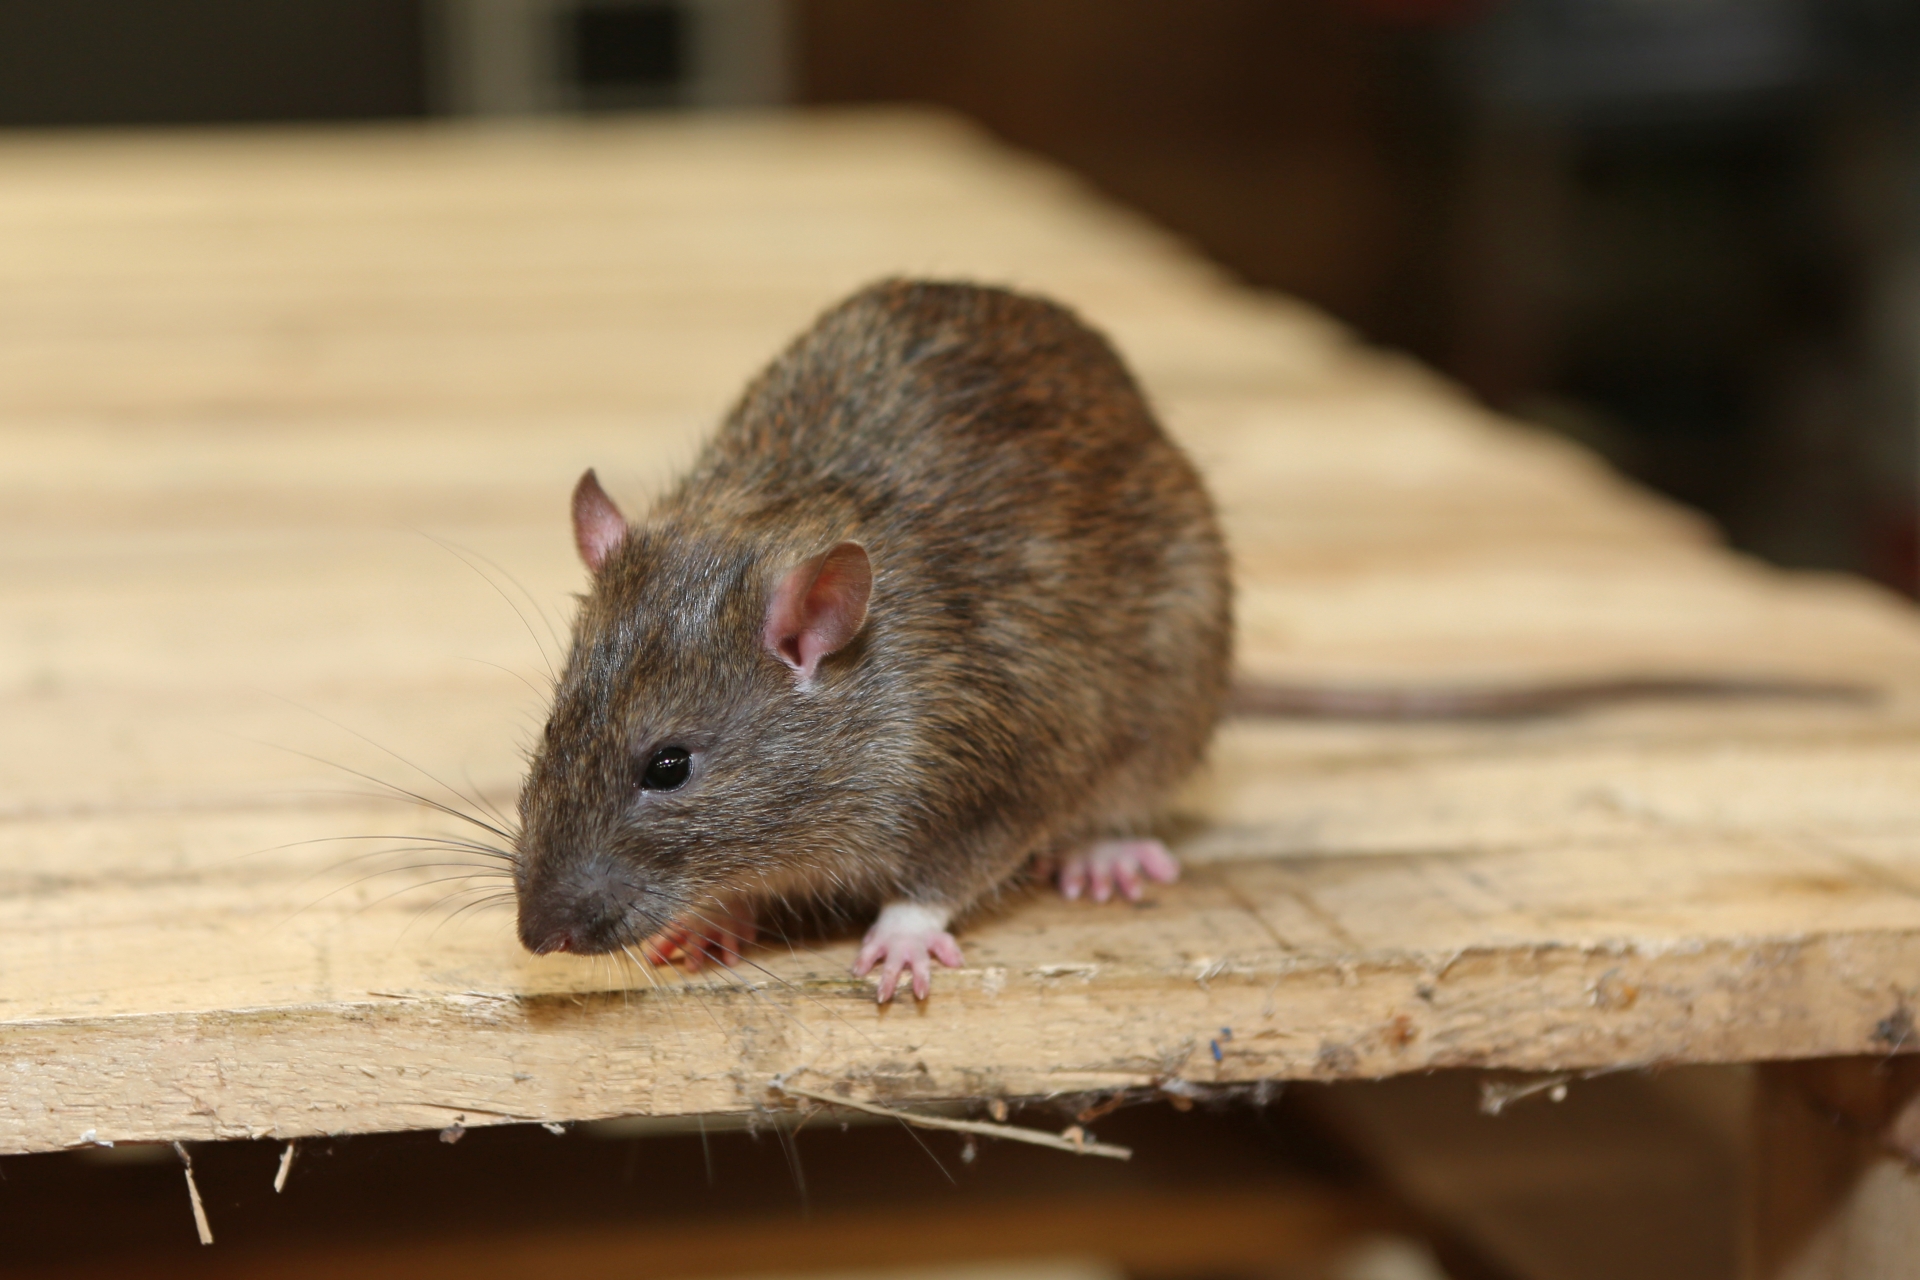 Rat Infestation, Pest Control in Aldgate, Monument, Tower Hill, EC3. Call Now 020 8166 9746